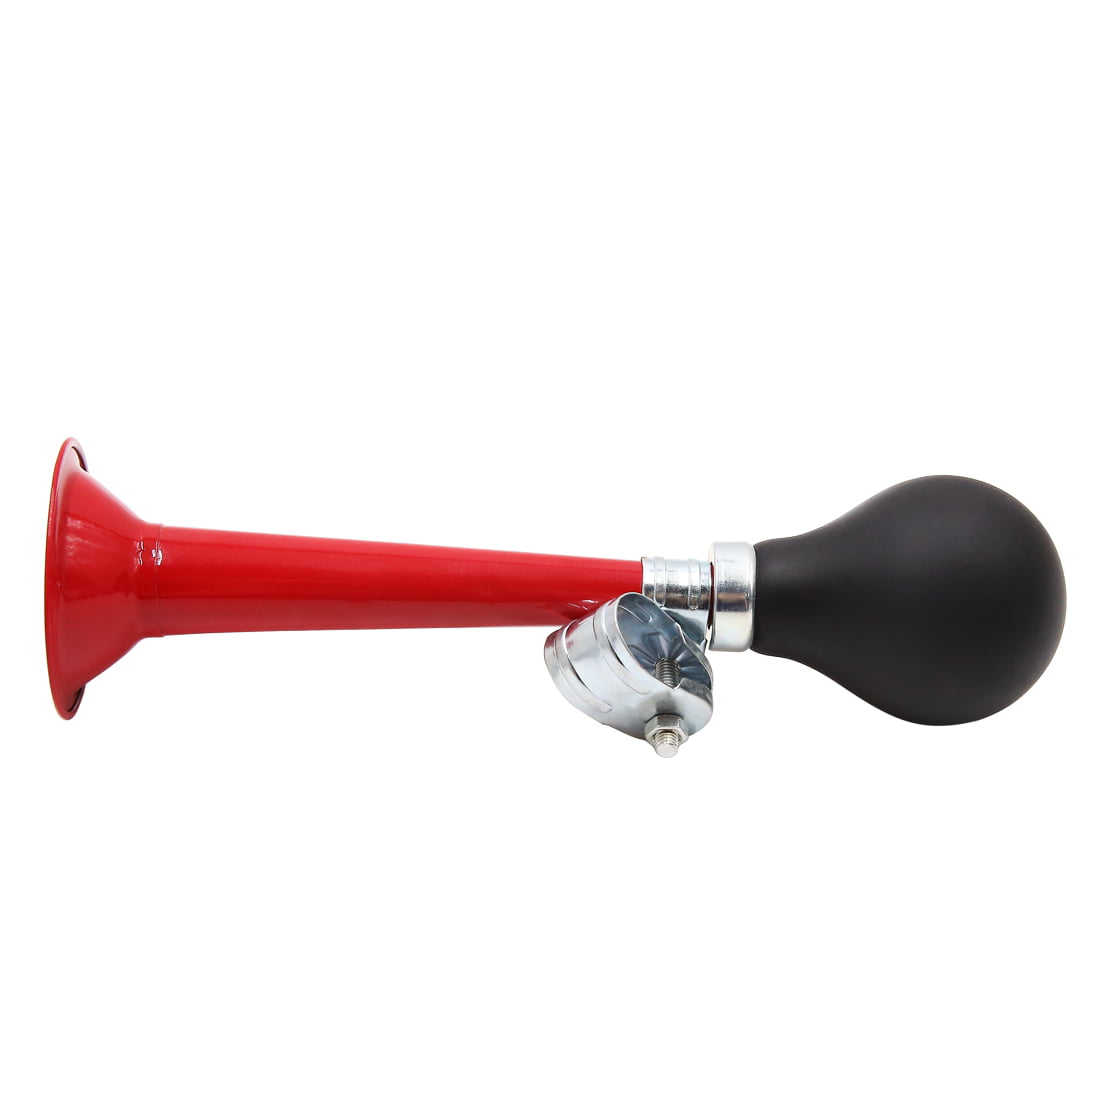 Bicycle Bike Cycling Metal Air Horn Hooter Squeeze Bugle Trumpet Bell 1x Sp W4G0 